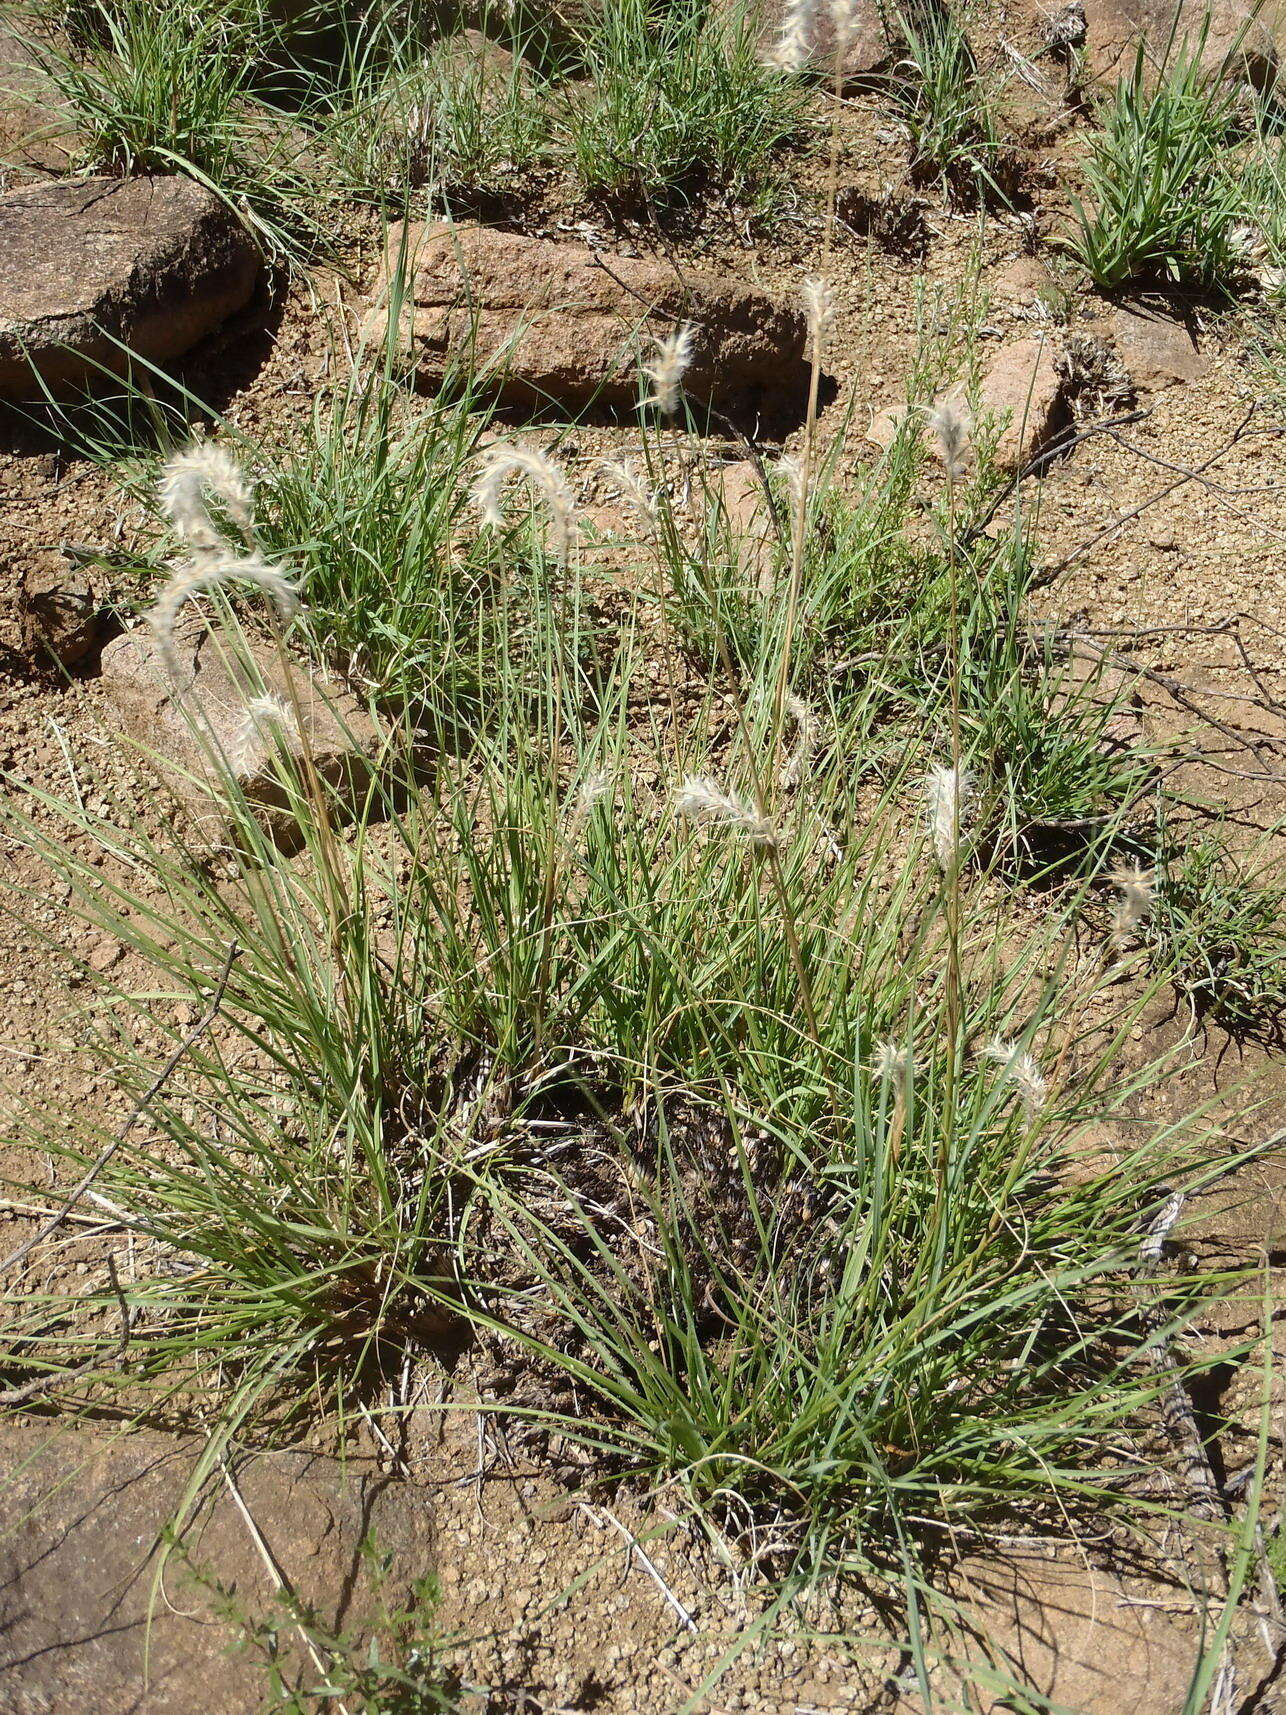 Image of balsamscale grass